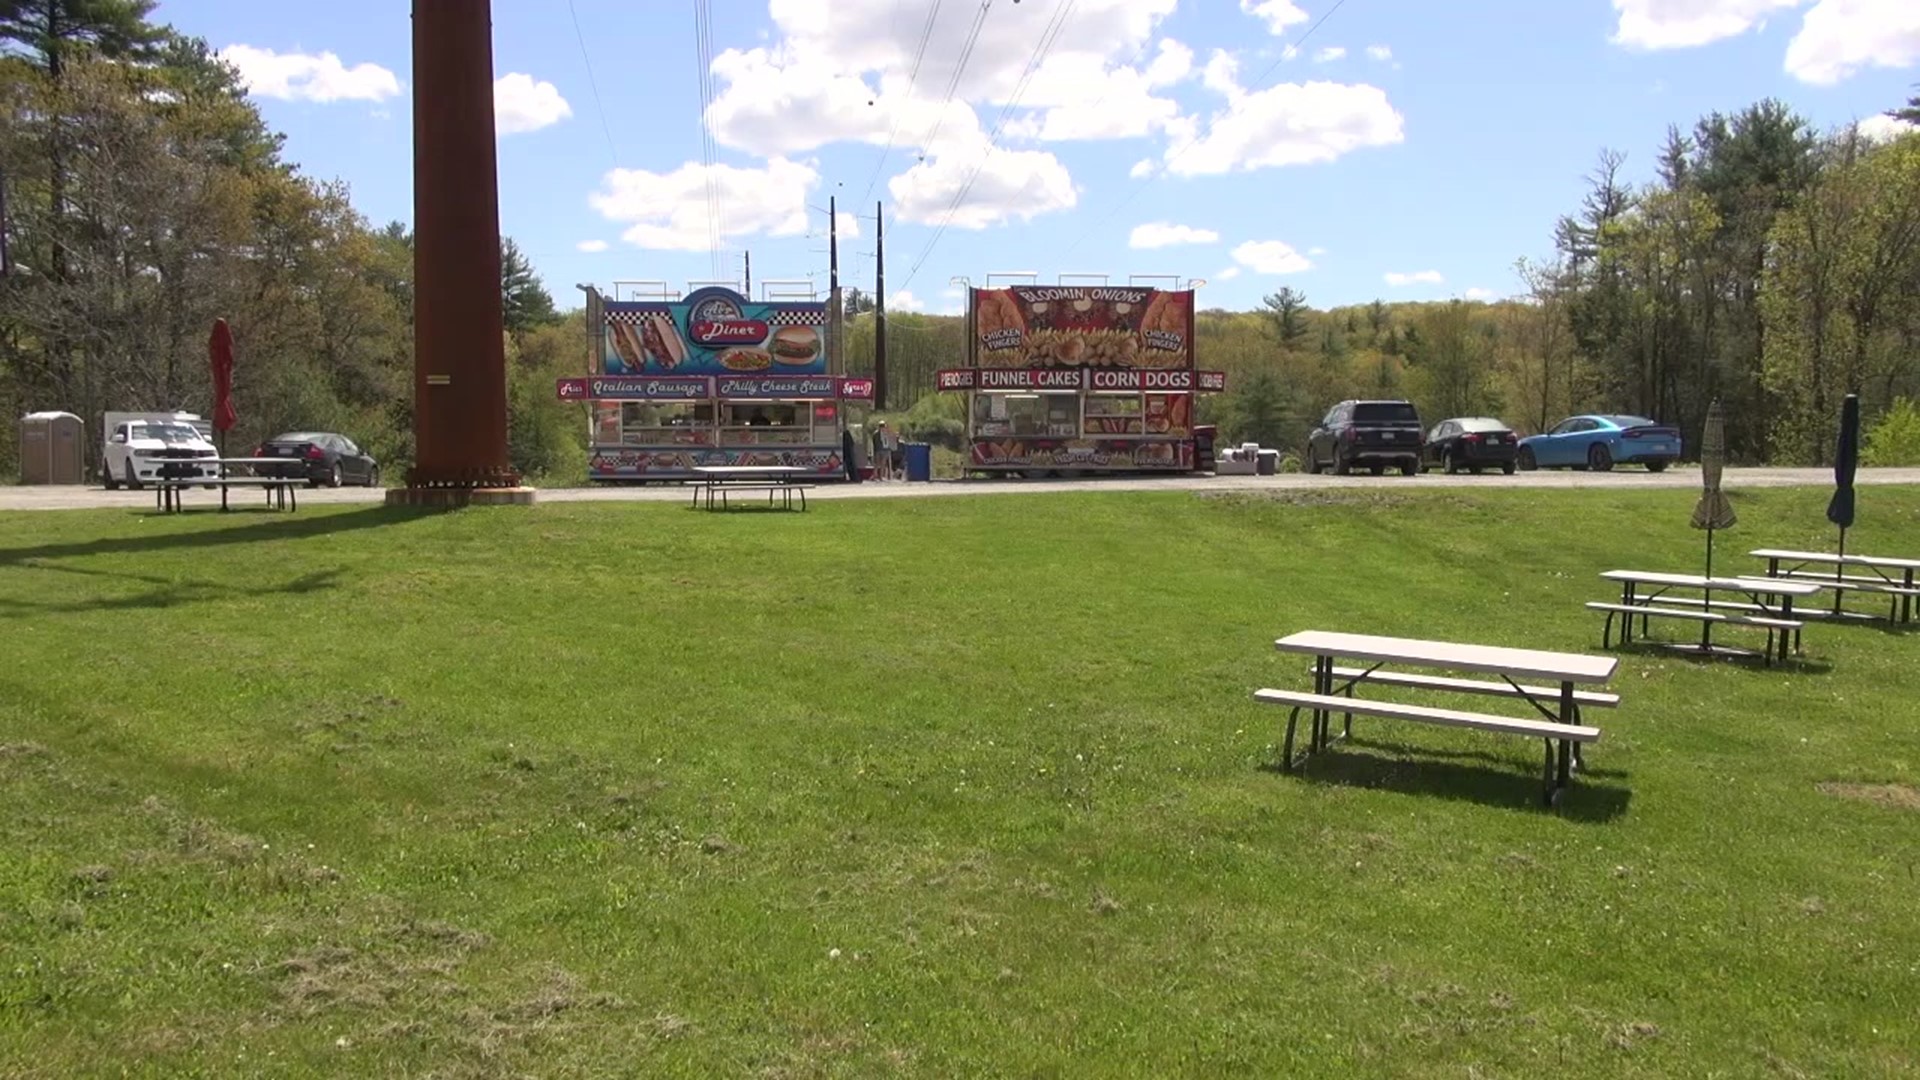 The concession stands along Route 6 near Hawley will soon be accompanied by a carnival ride, already approved by Palmyra Township supervisors.